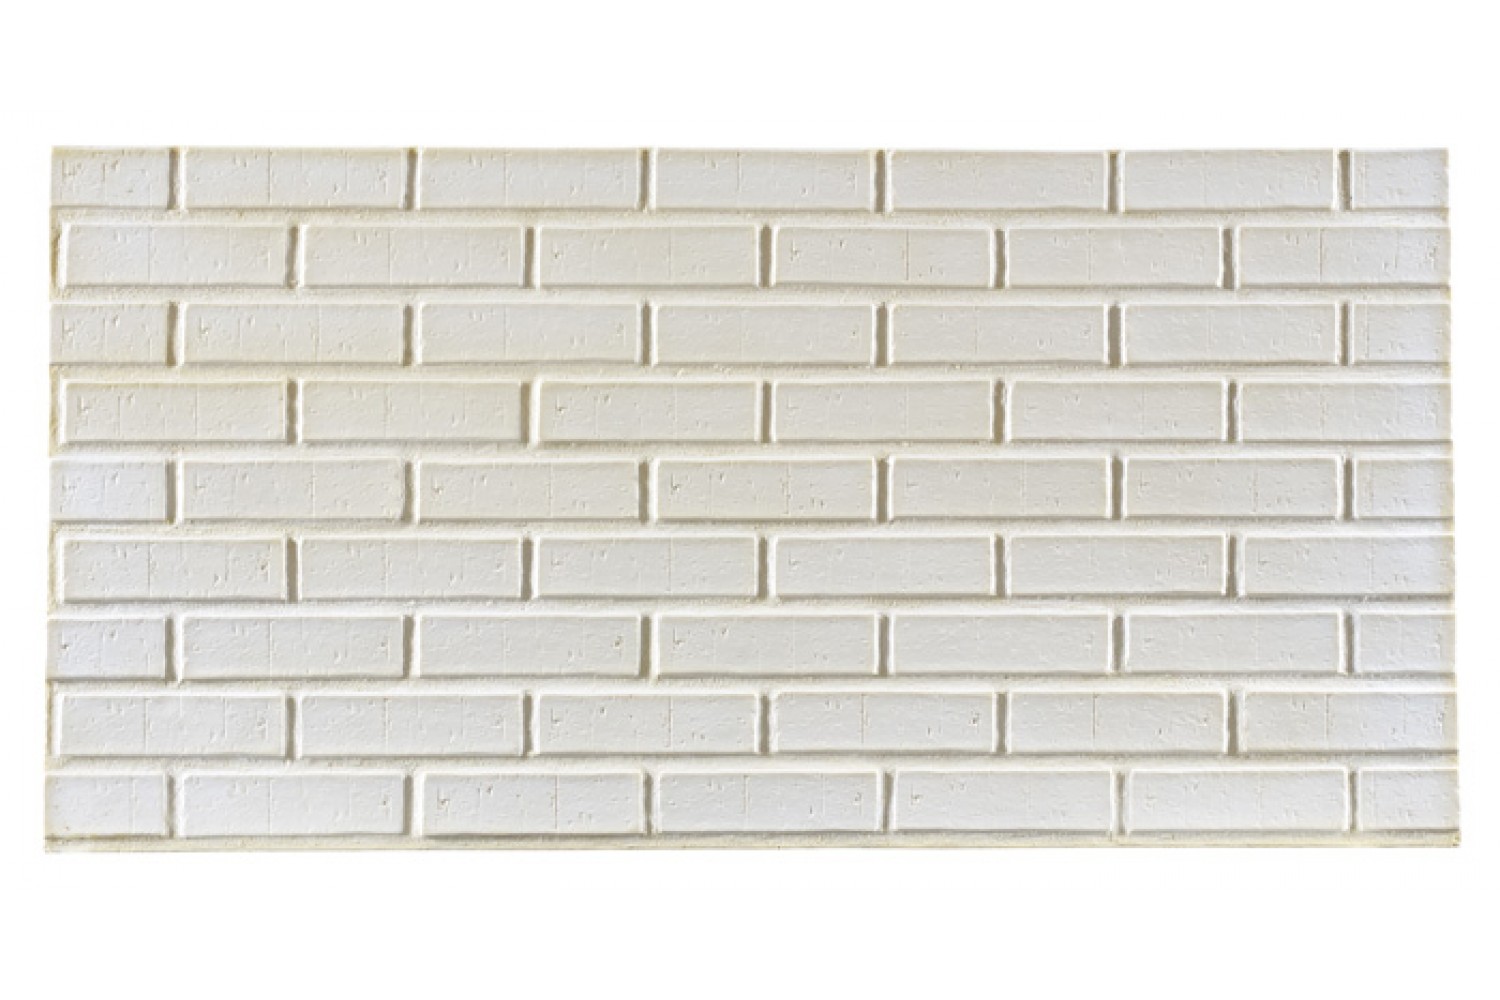 Contemporary Brick Standard - Primed/Unfinished